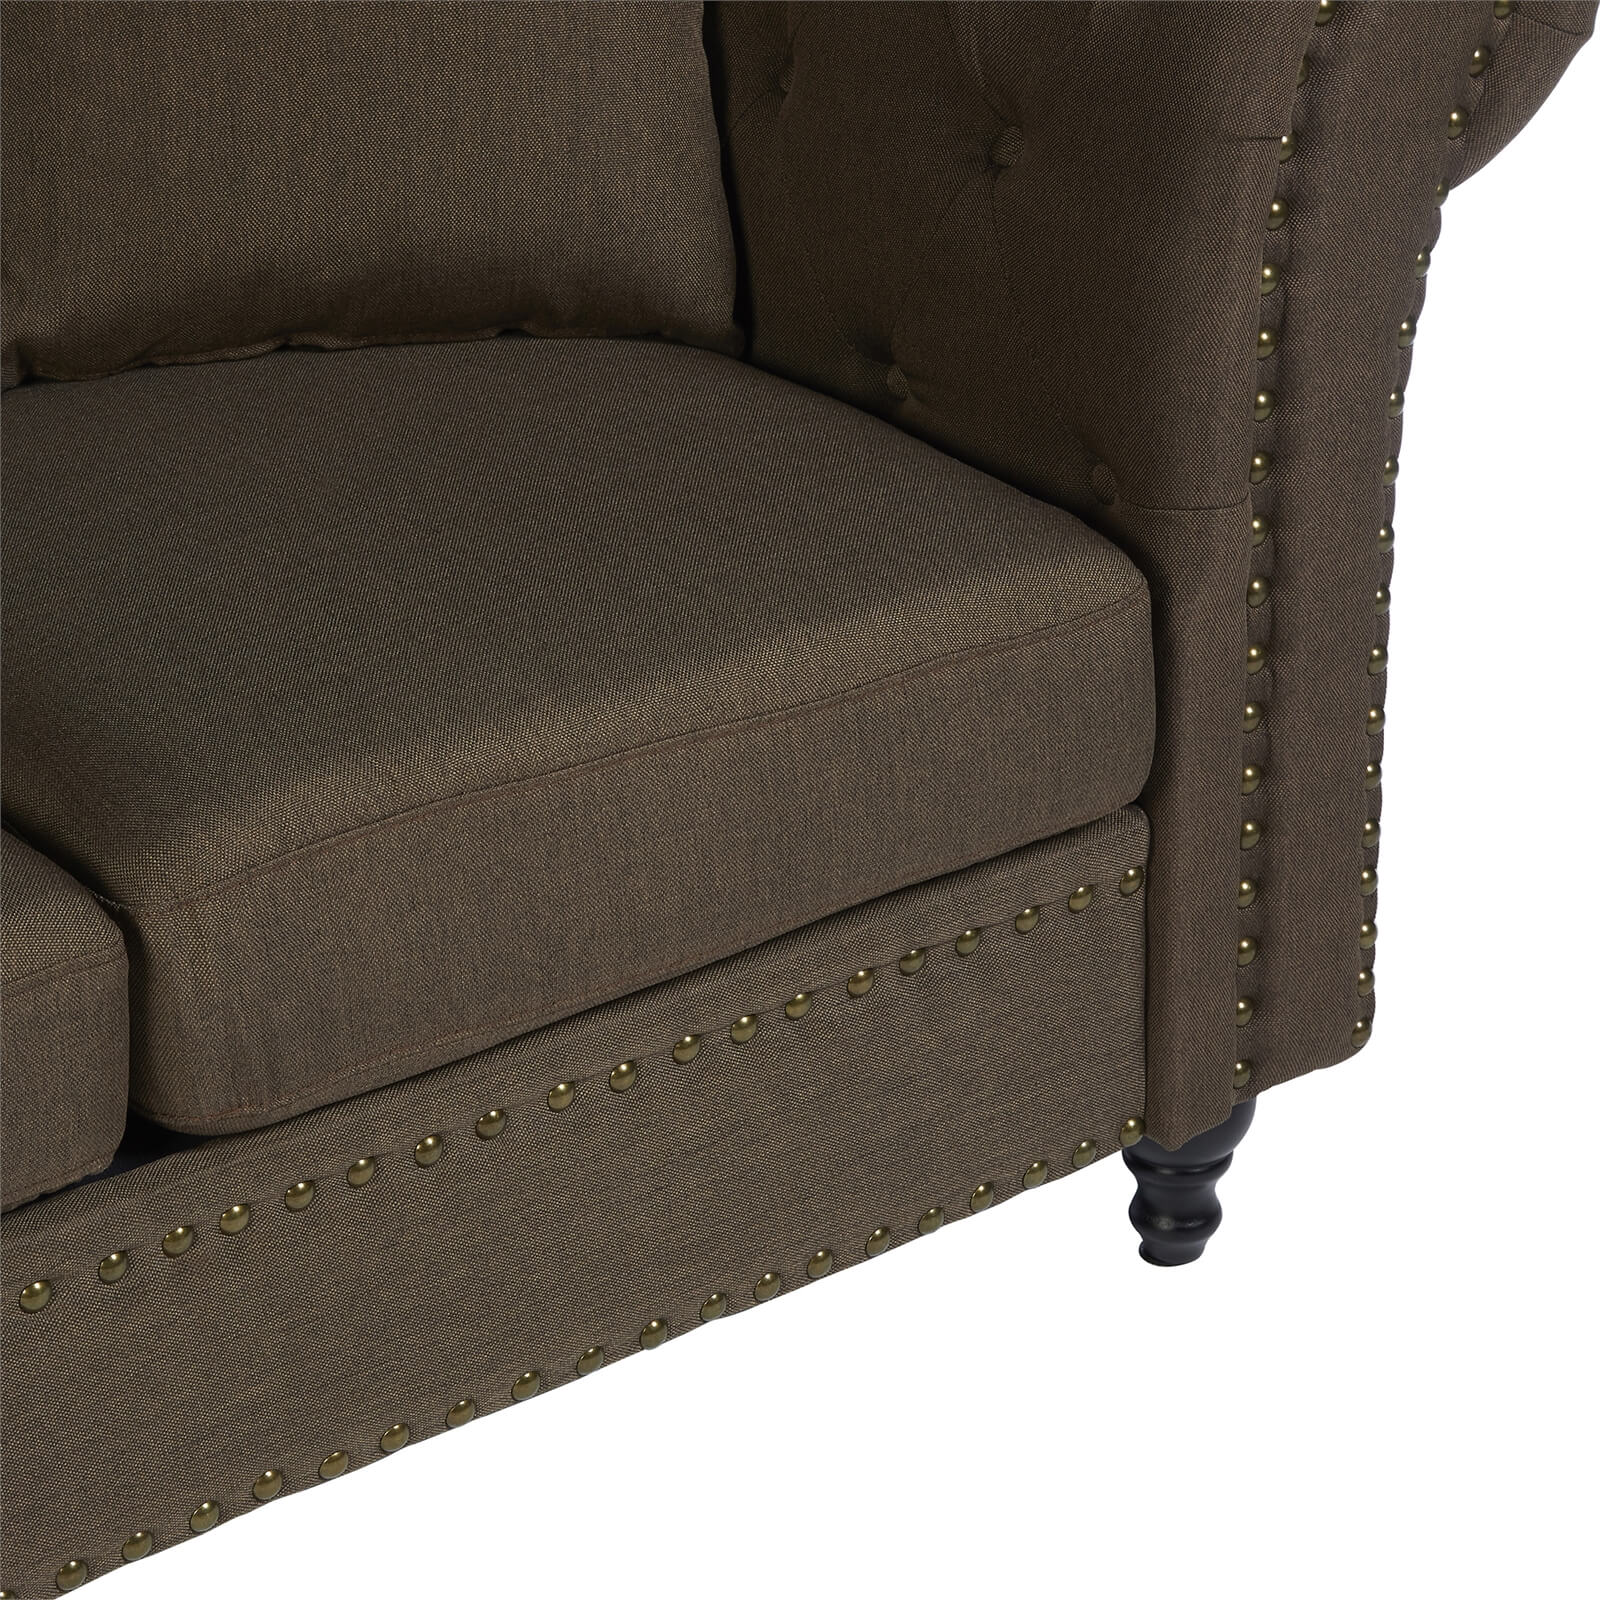 Fable 2 Seat Chesterfield Sofa - Natural